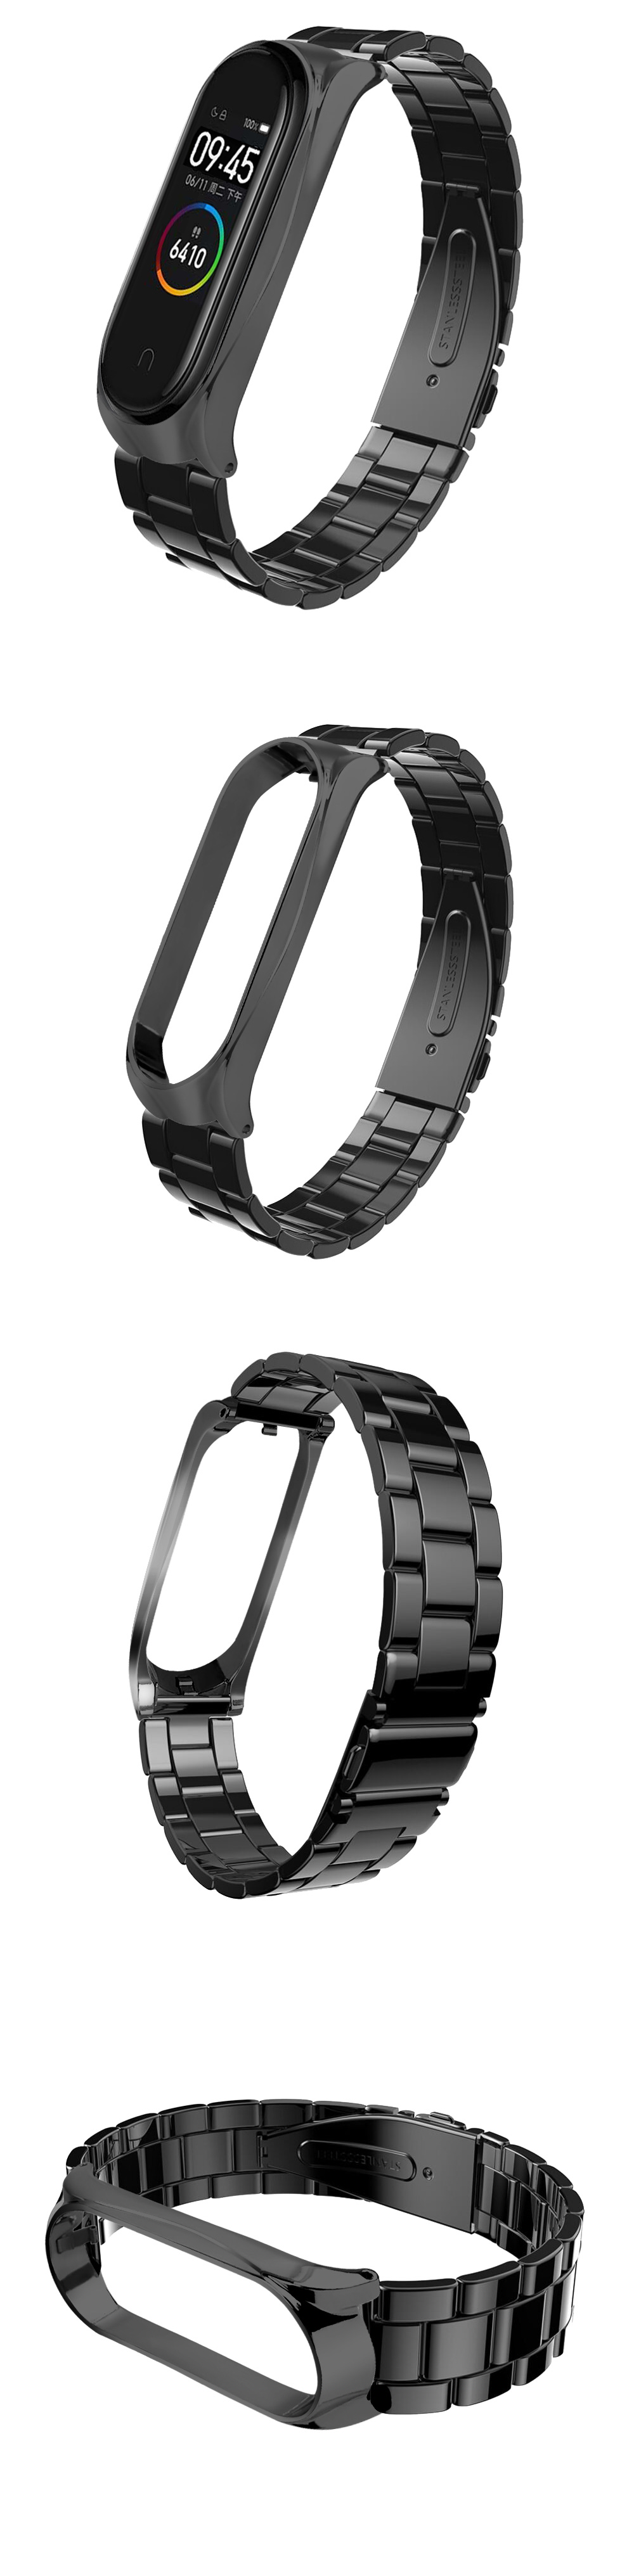 Bakeey-Three-Beads-Solid-Stainless-Steel-Watch-Band-Watch-Strap-Replacement-for-Xiaomi-Miband-4-Non--1508780-3